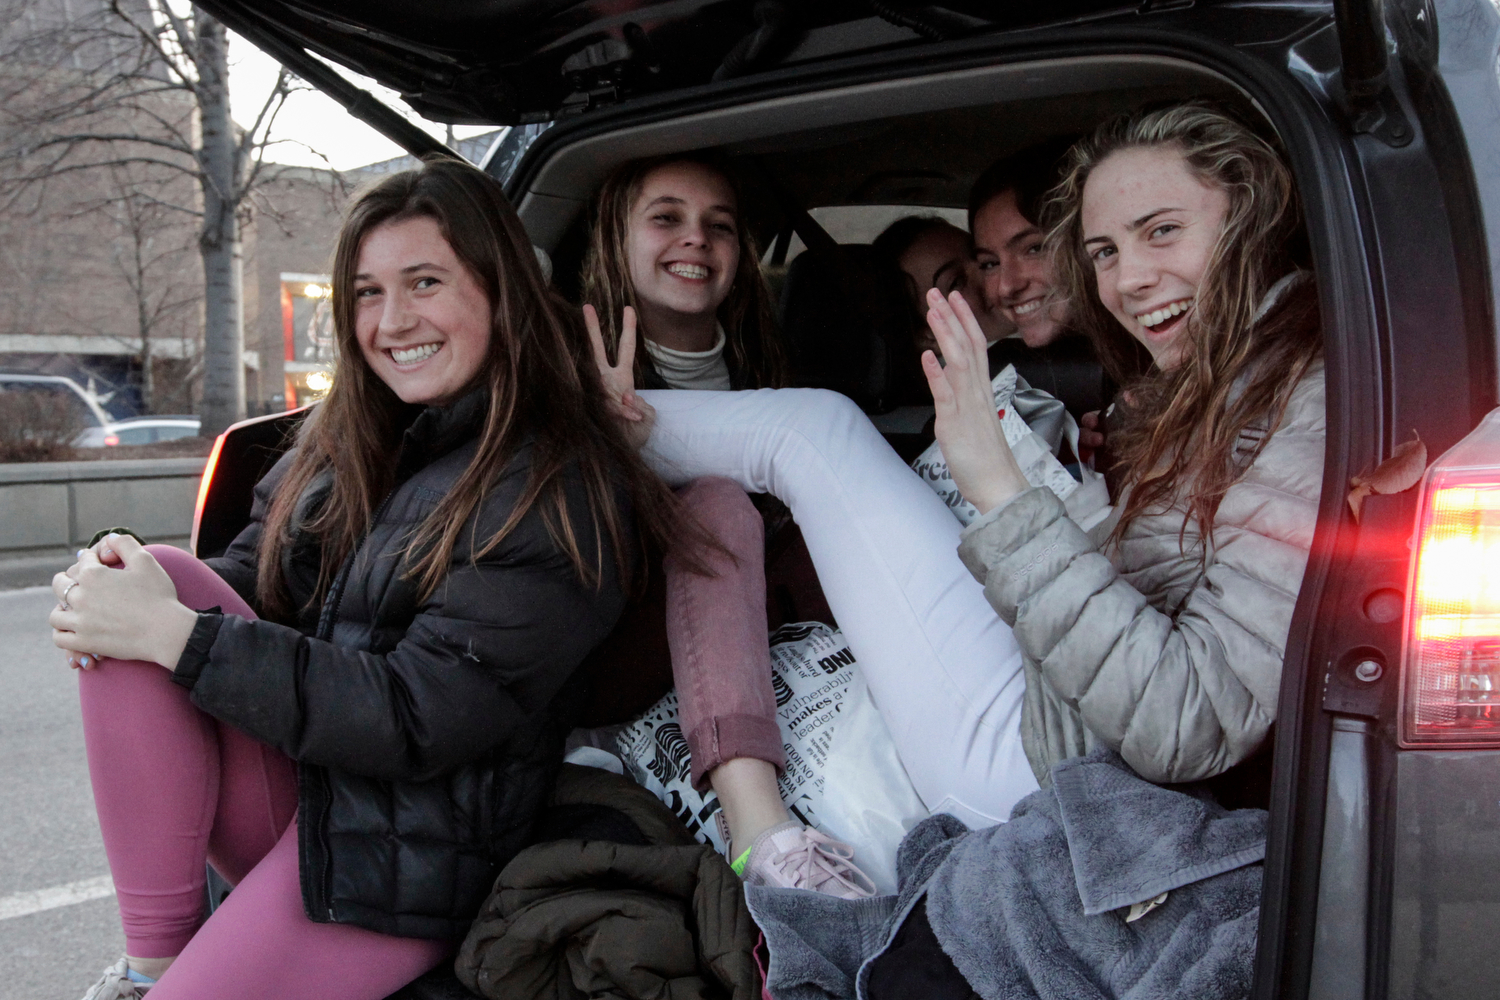 Students pack the back of an SUV after class on Roosevelt Road near the Flames Athletic Center.